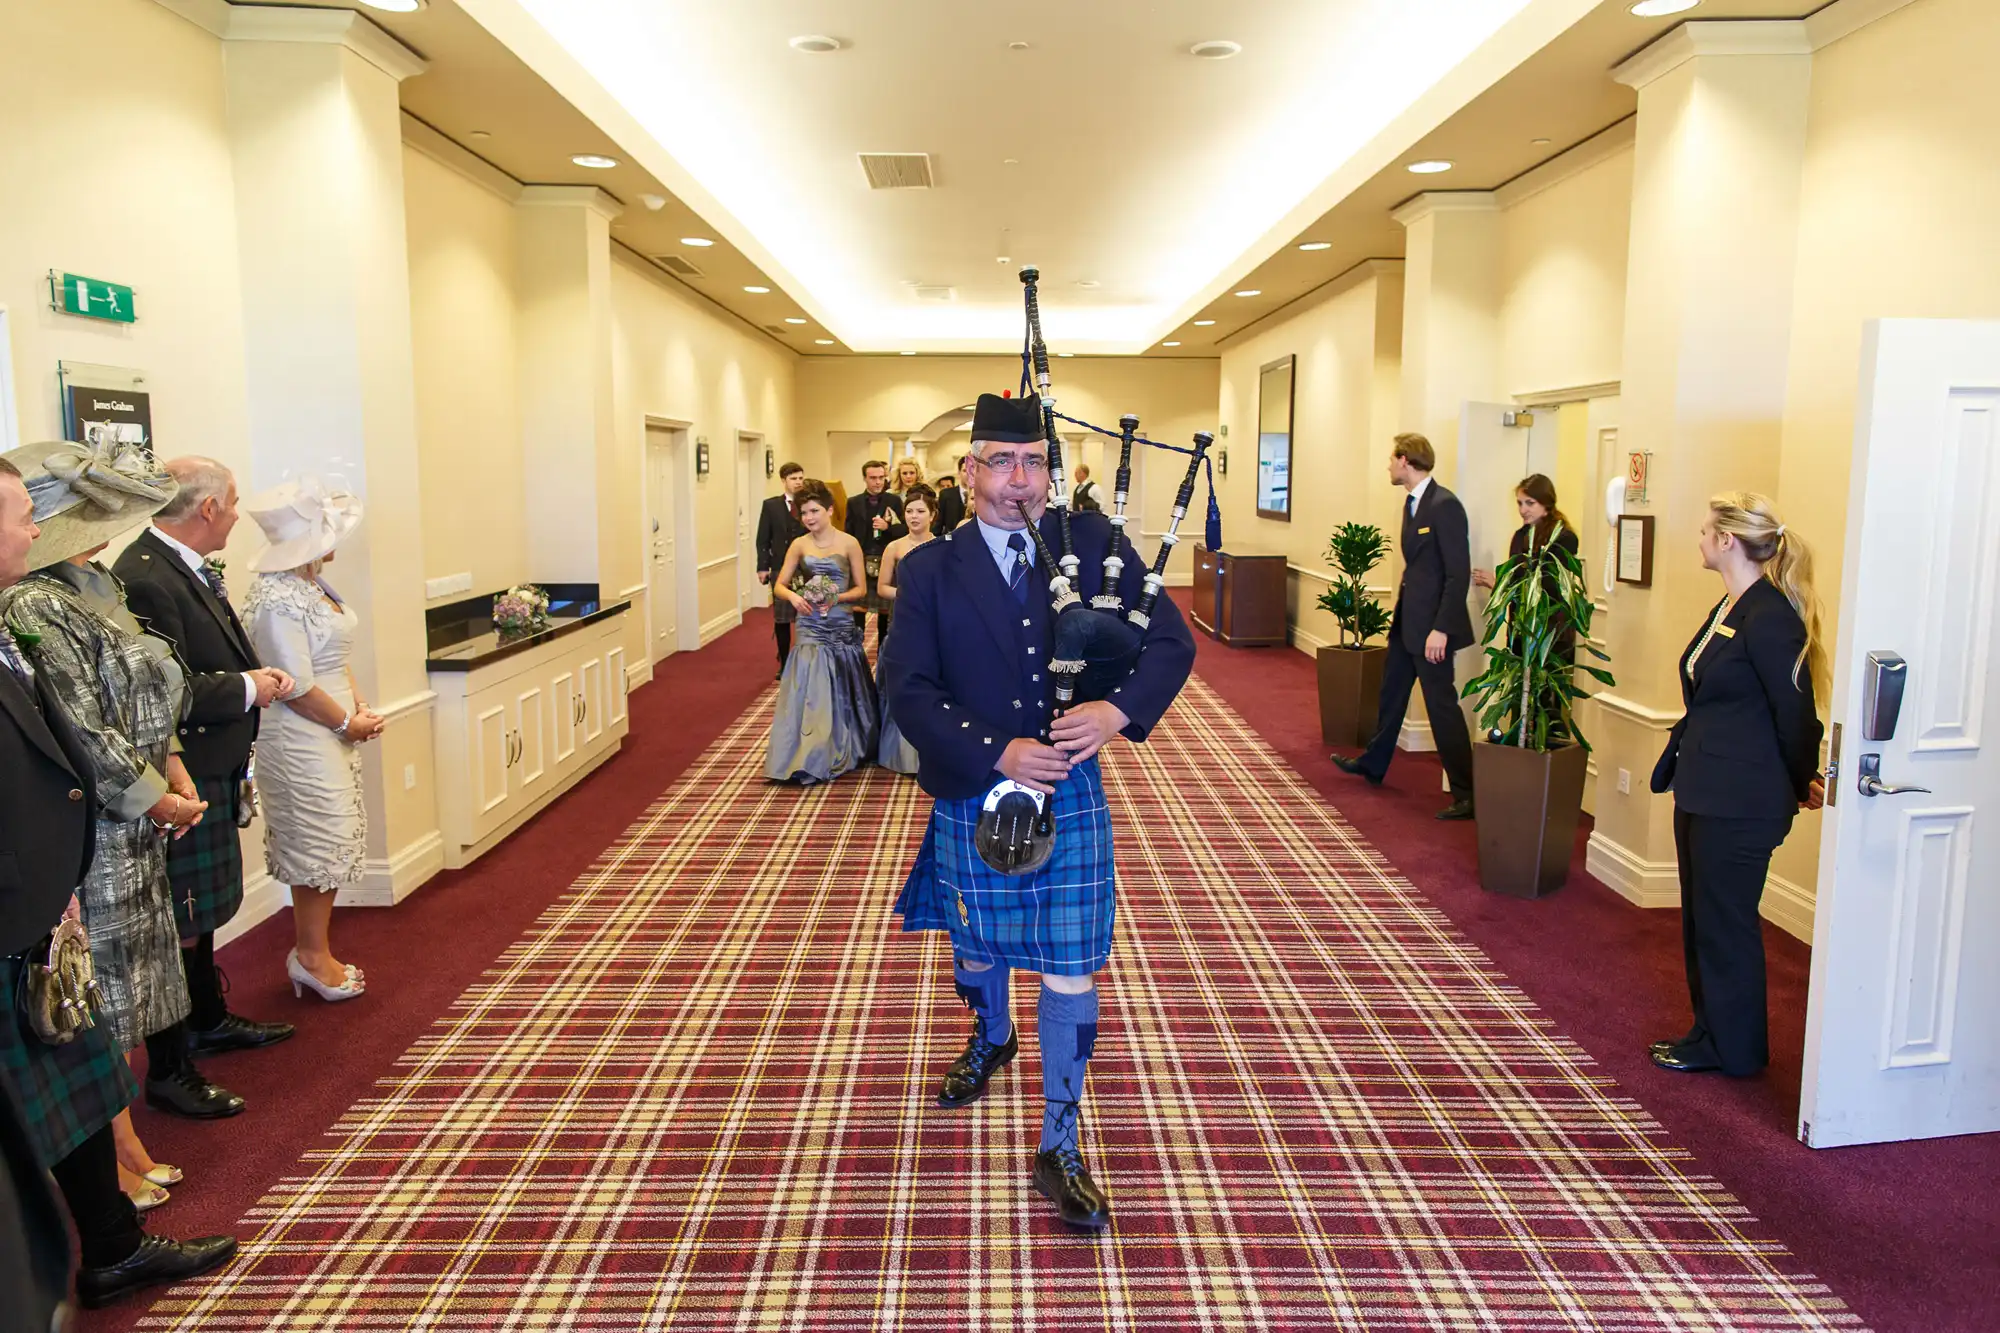 A bagpiper in traditional scottish attire playing in a hotel corridor, with spectators in formal wear observing.